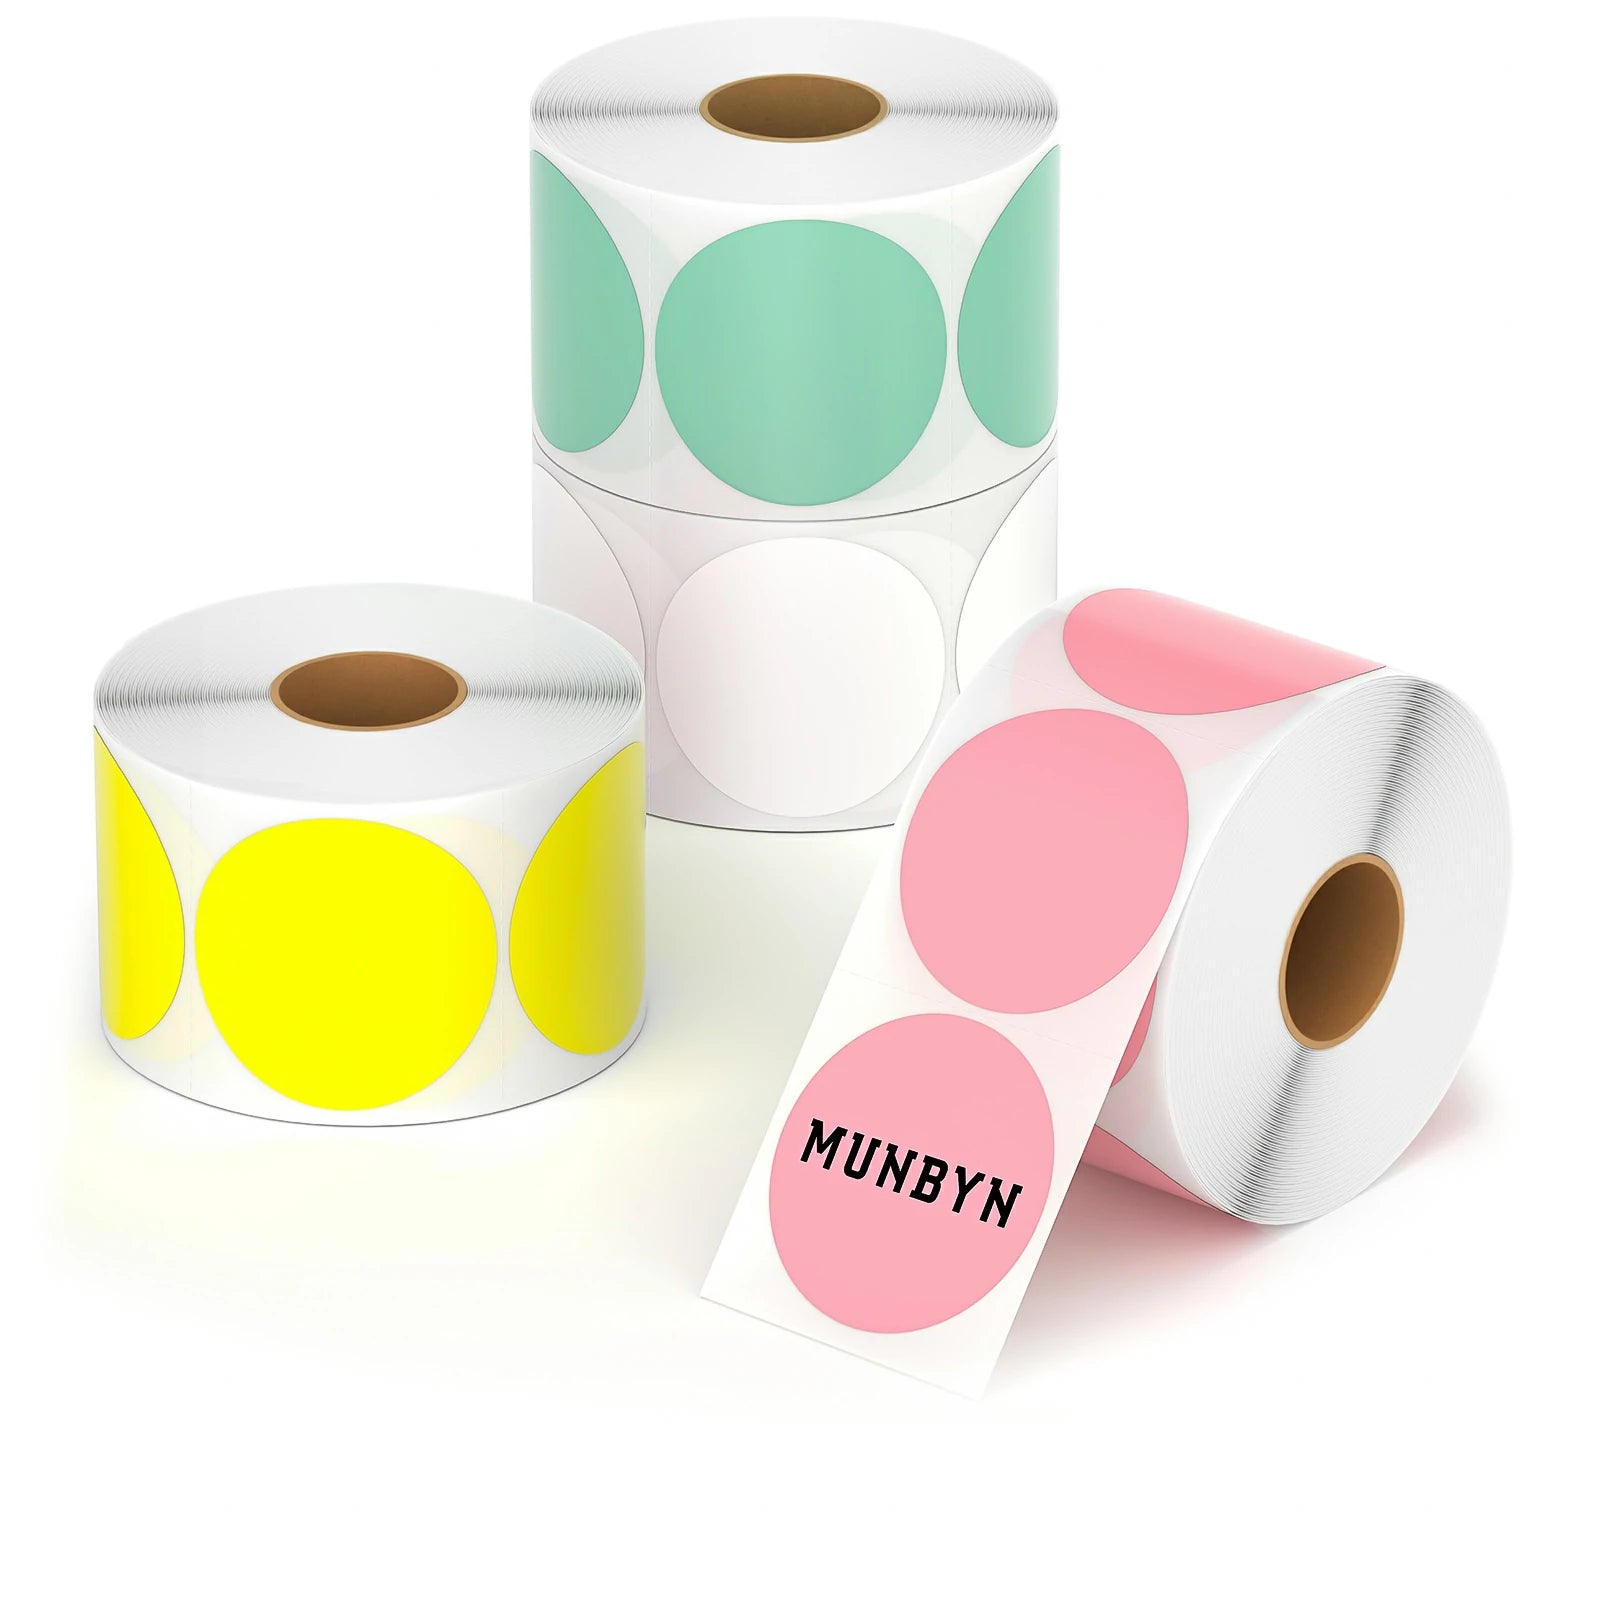 The four-colour round thermal labels can be used as personalised sticker labels.